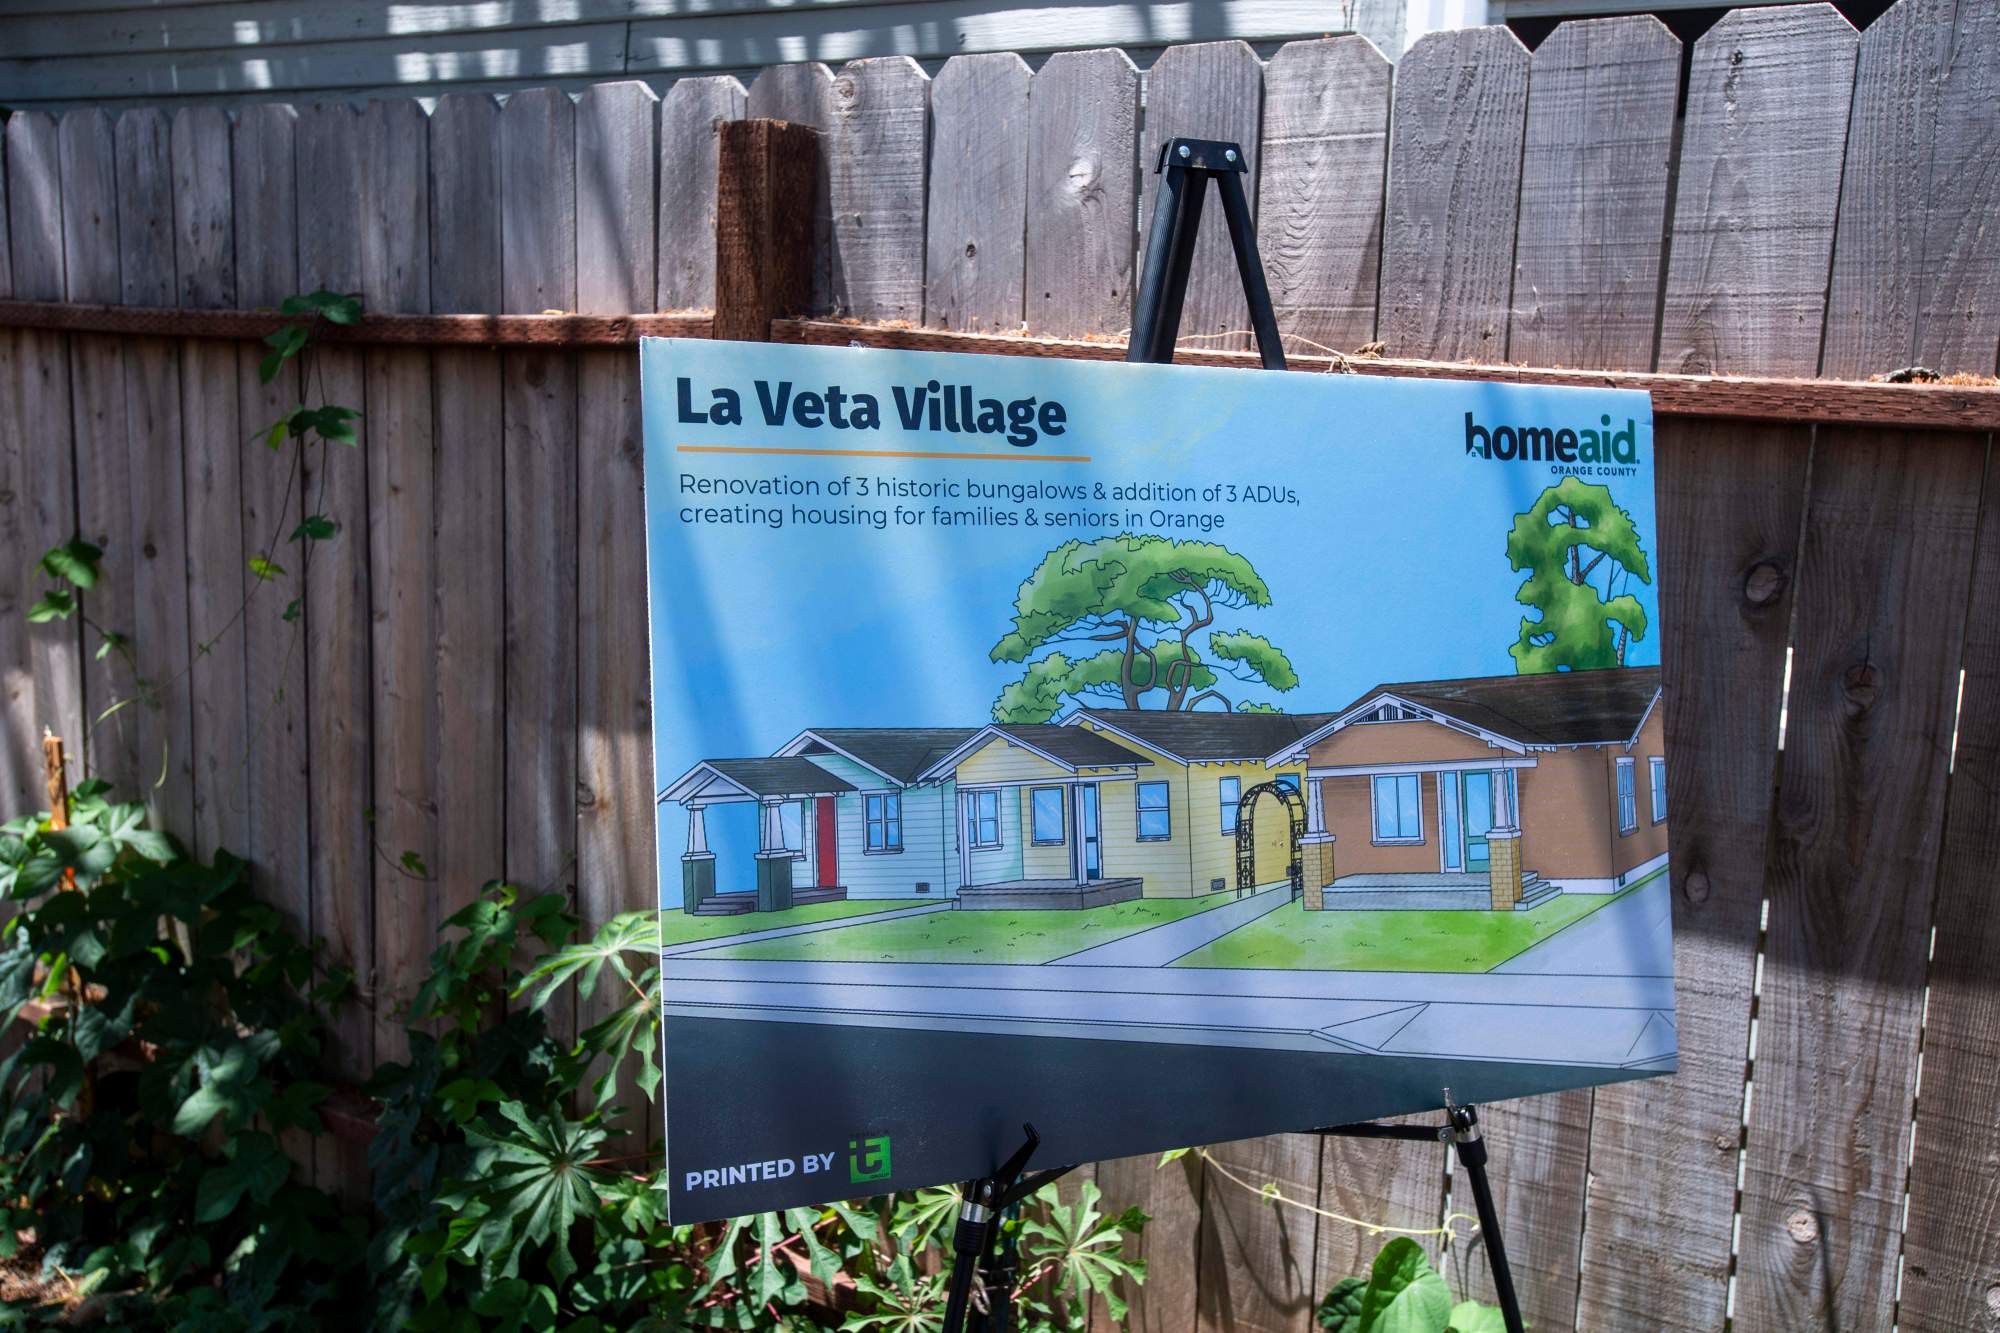 Orange County officials broke ground on Friday, June 21, on a new development to refurbish three historic homes for the creation of La Veta Village in the City of Orange that will add 20 new beds for families, seniors and others in need.(Photo by Michael Goulding, Contributing Photographer)